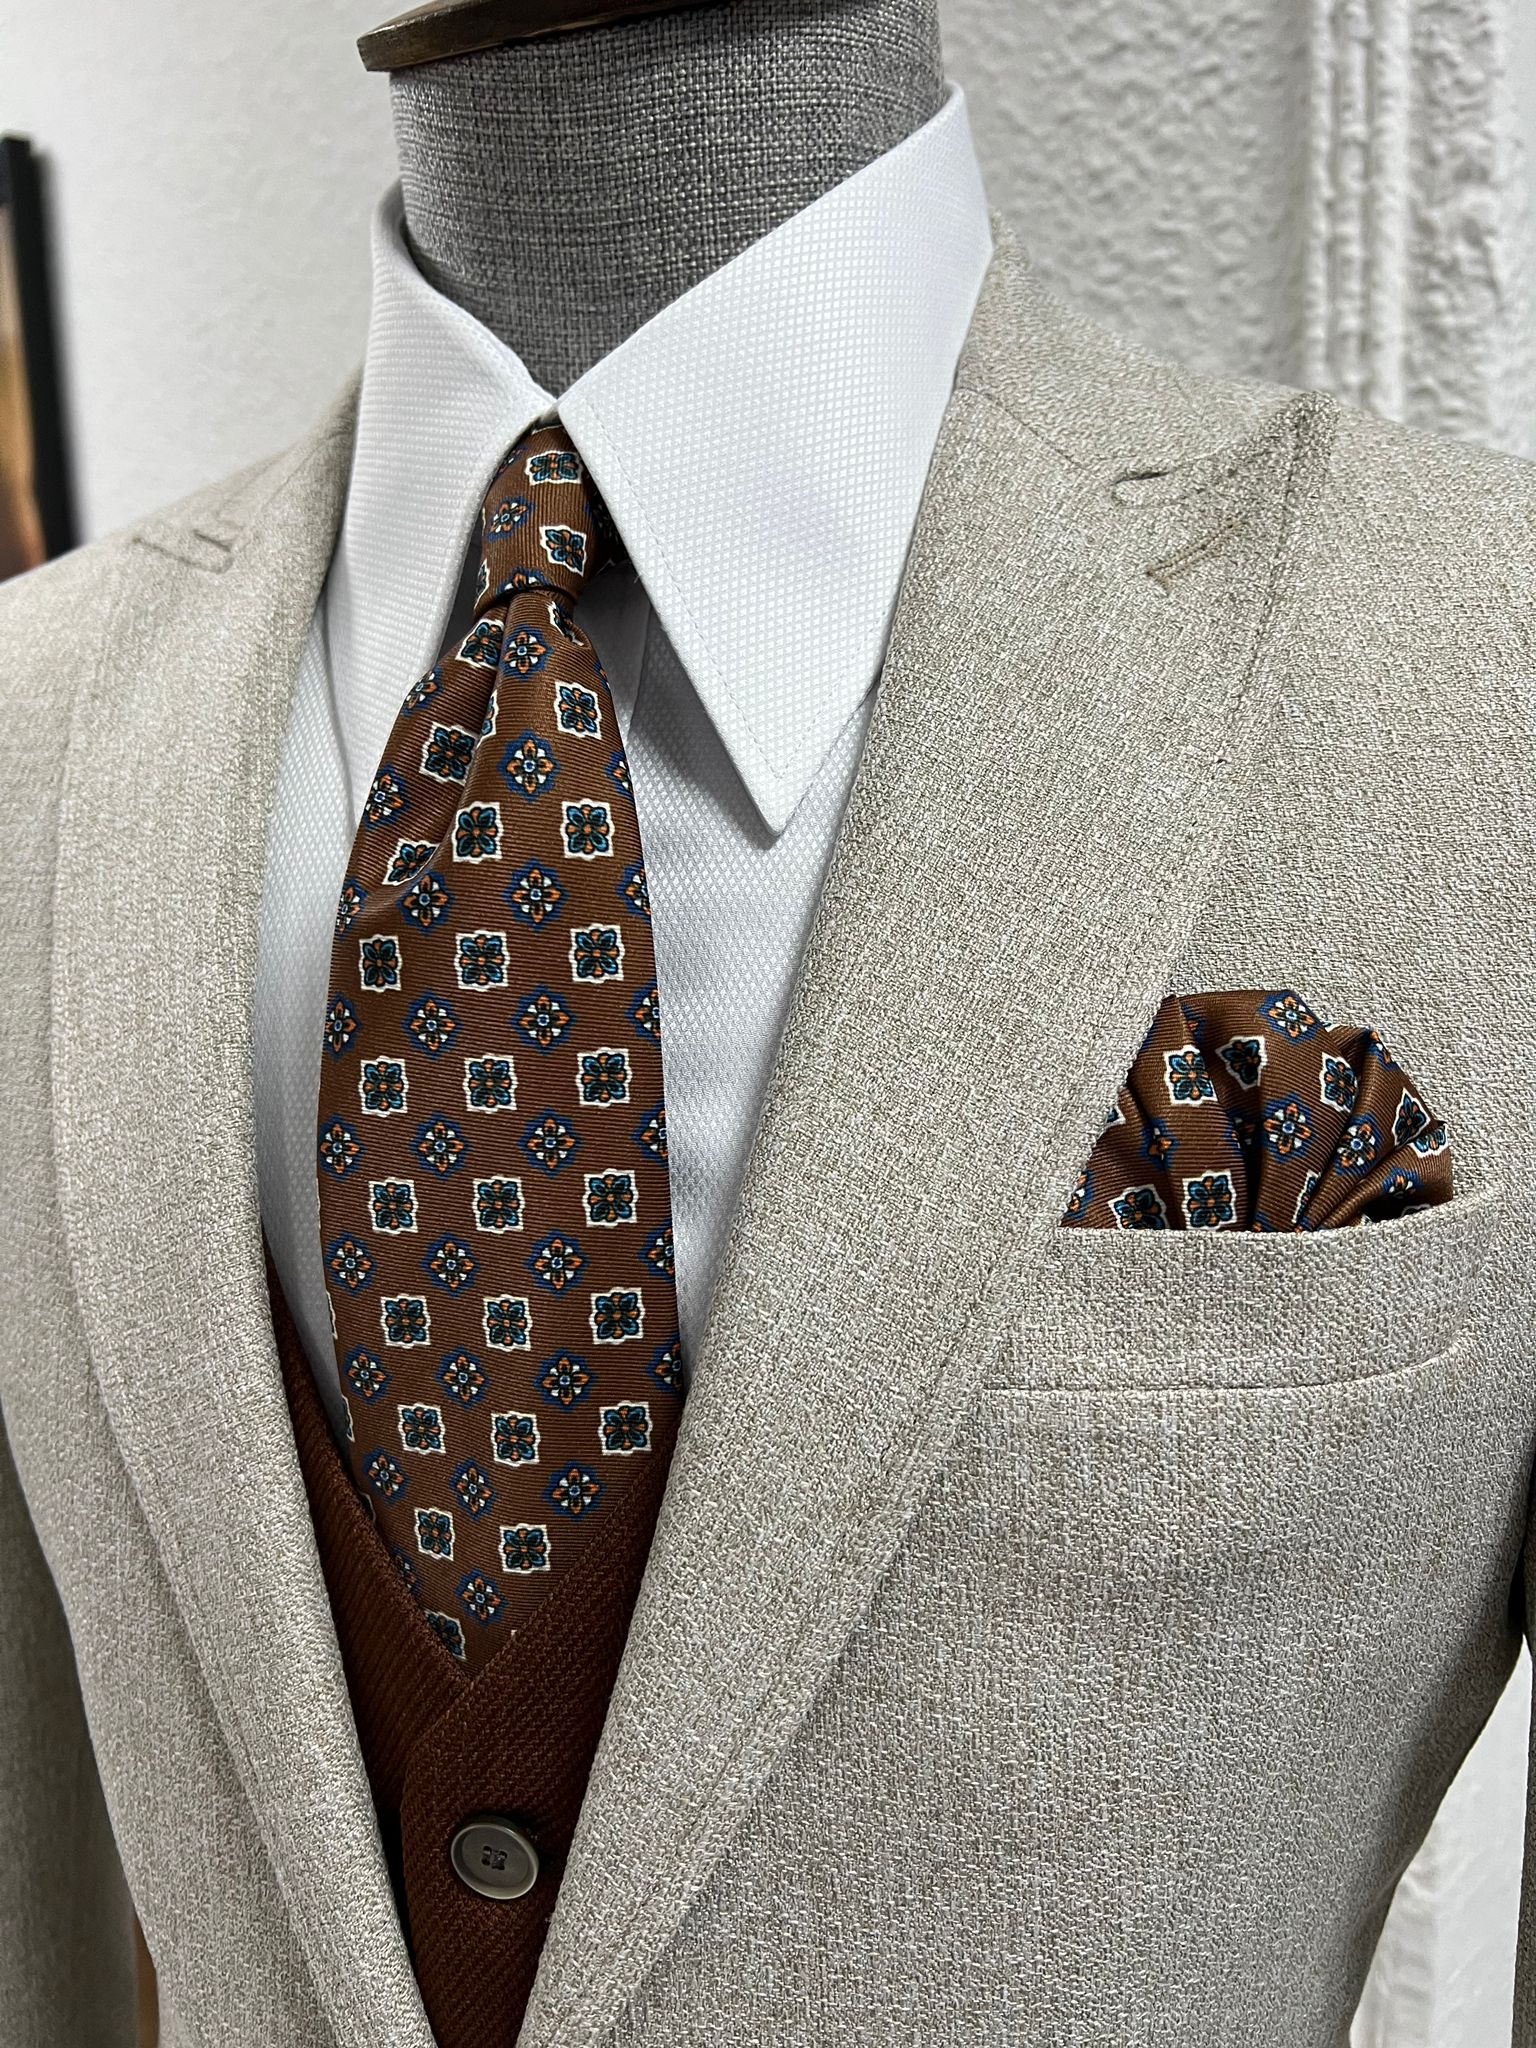 Classic Color Combinations in Menswear | Beige suits, Mens outfits, Tan suit